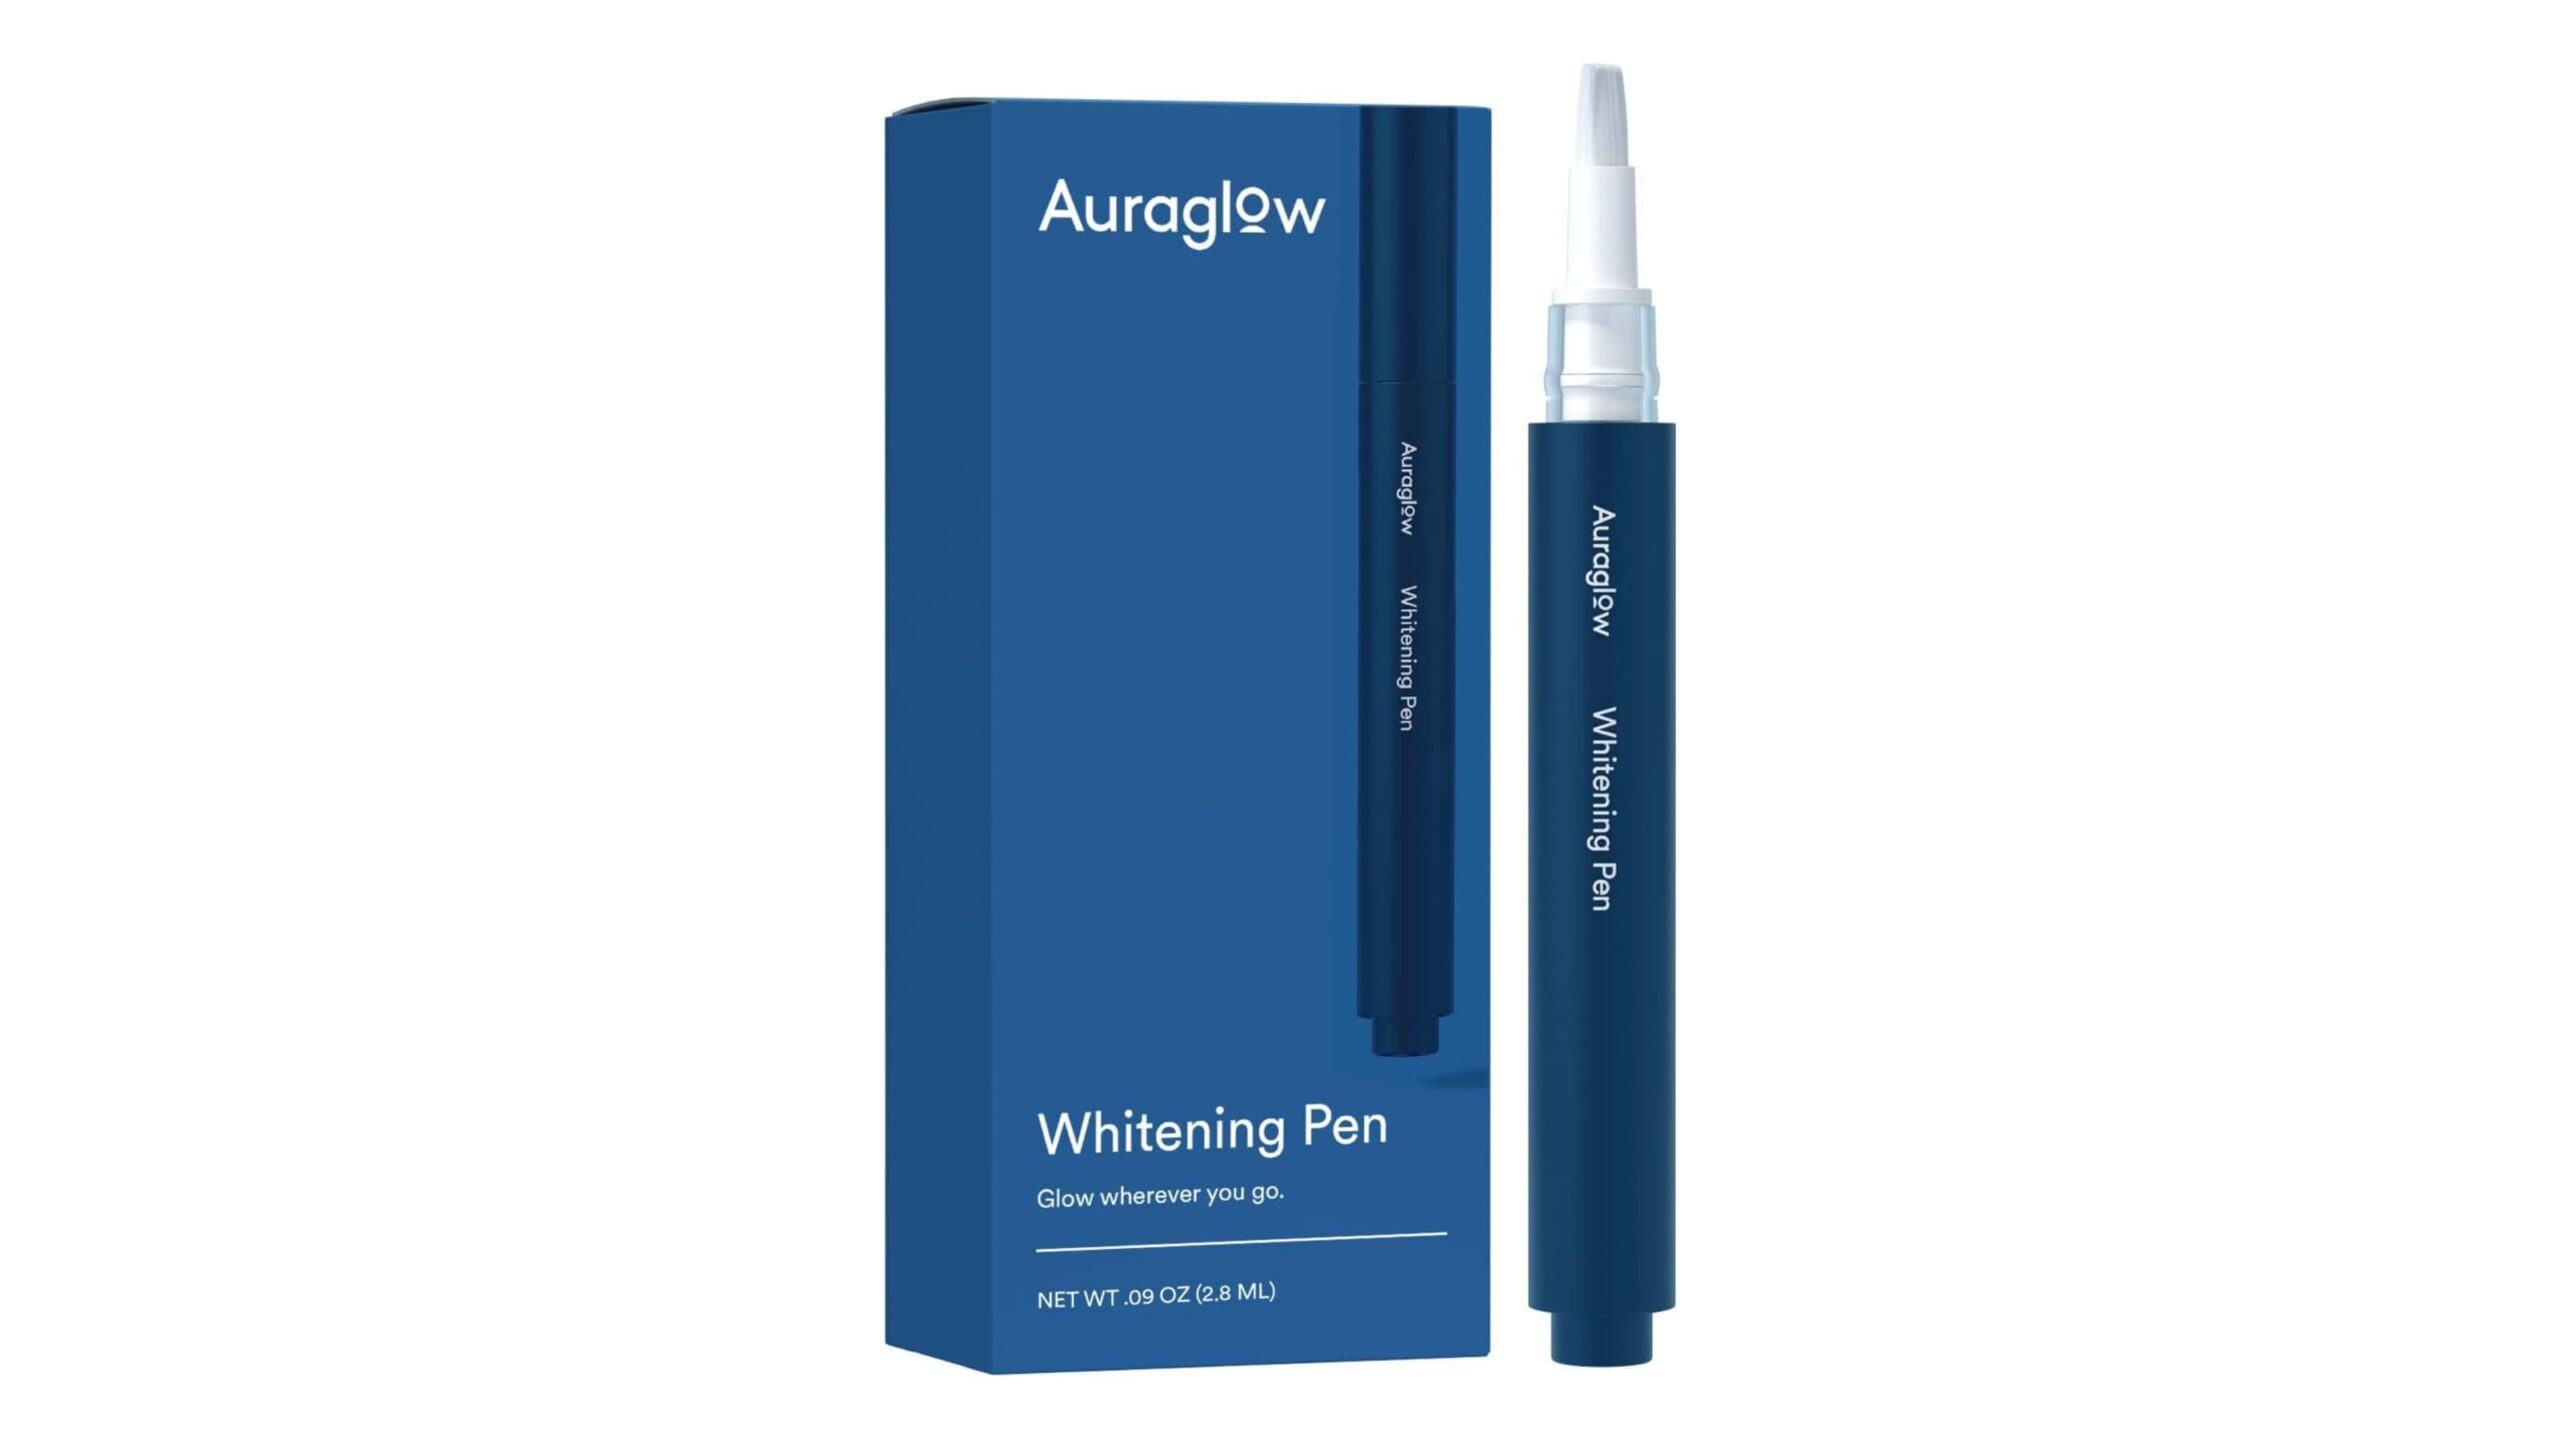 Pack of Auraglow teeth whitening pen, overnight teeth whitening pen with 35% carbamide peroxide, offering 20+ whitening treatments with no sensitivity, 2.8mL